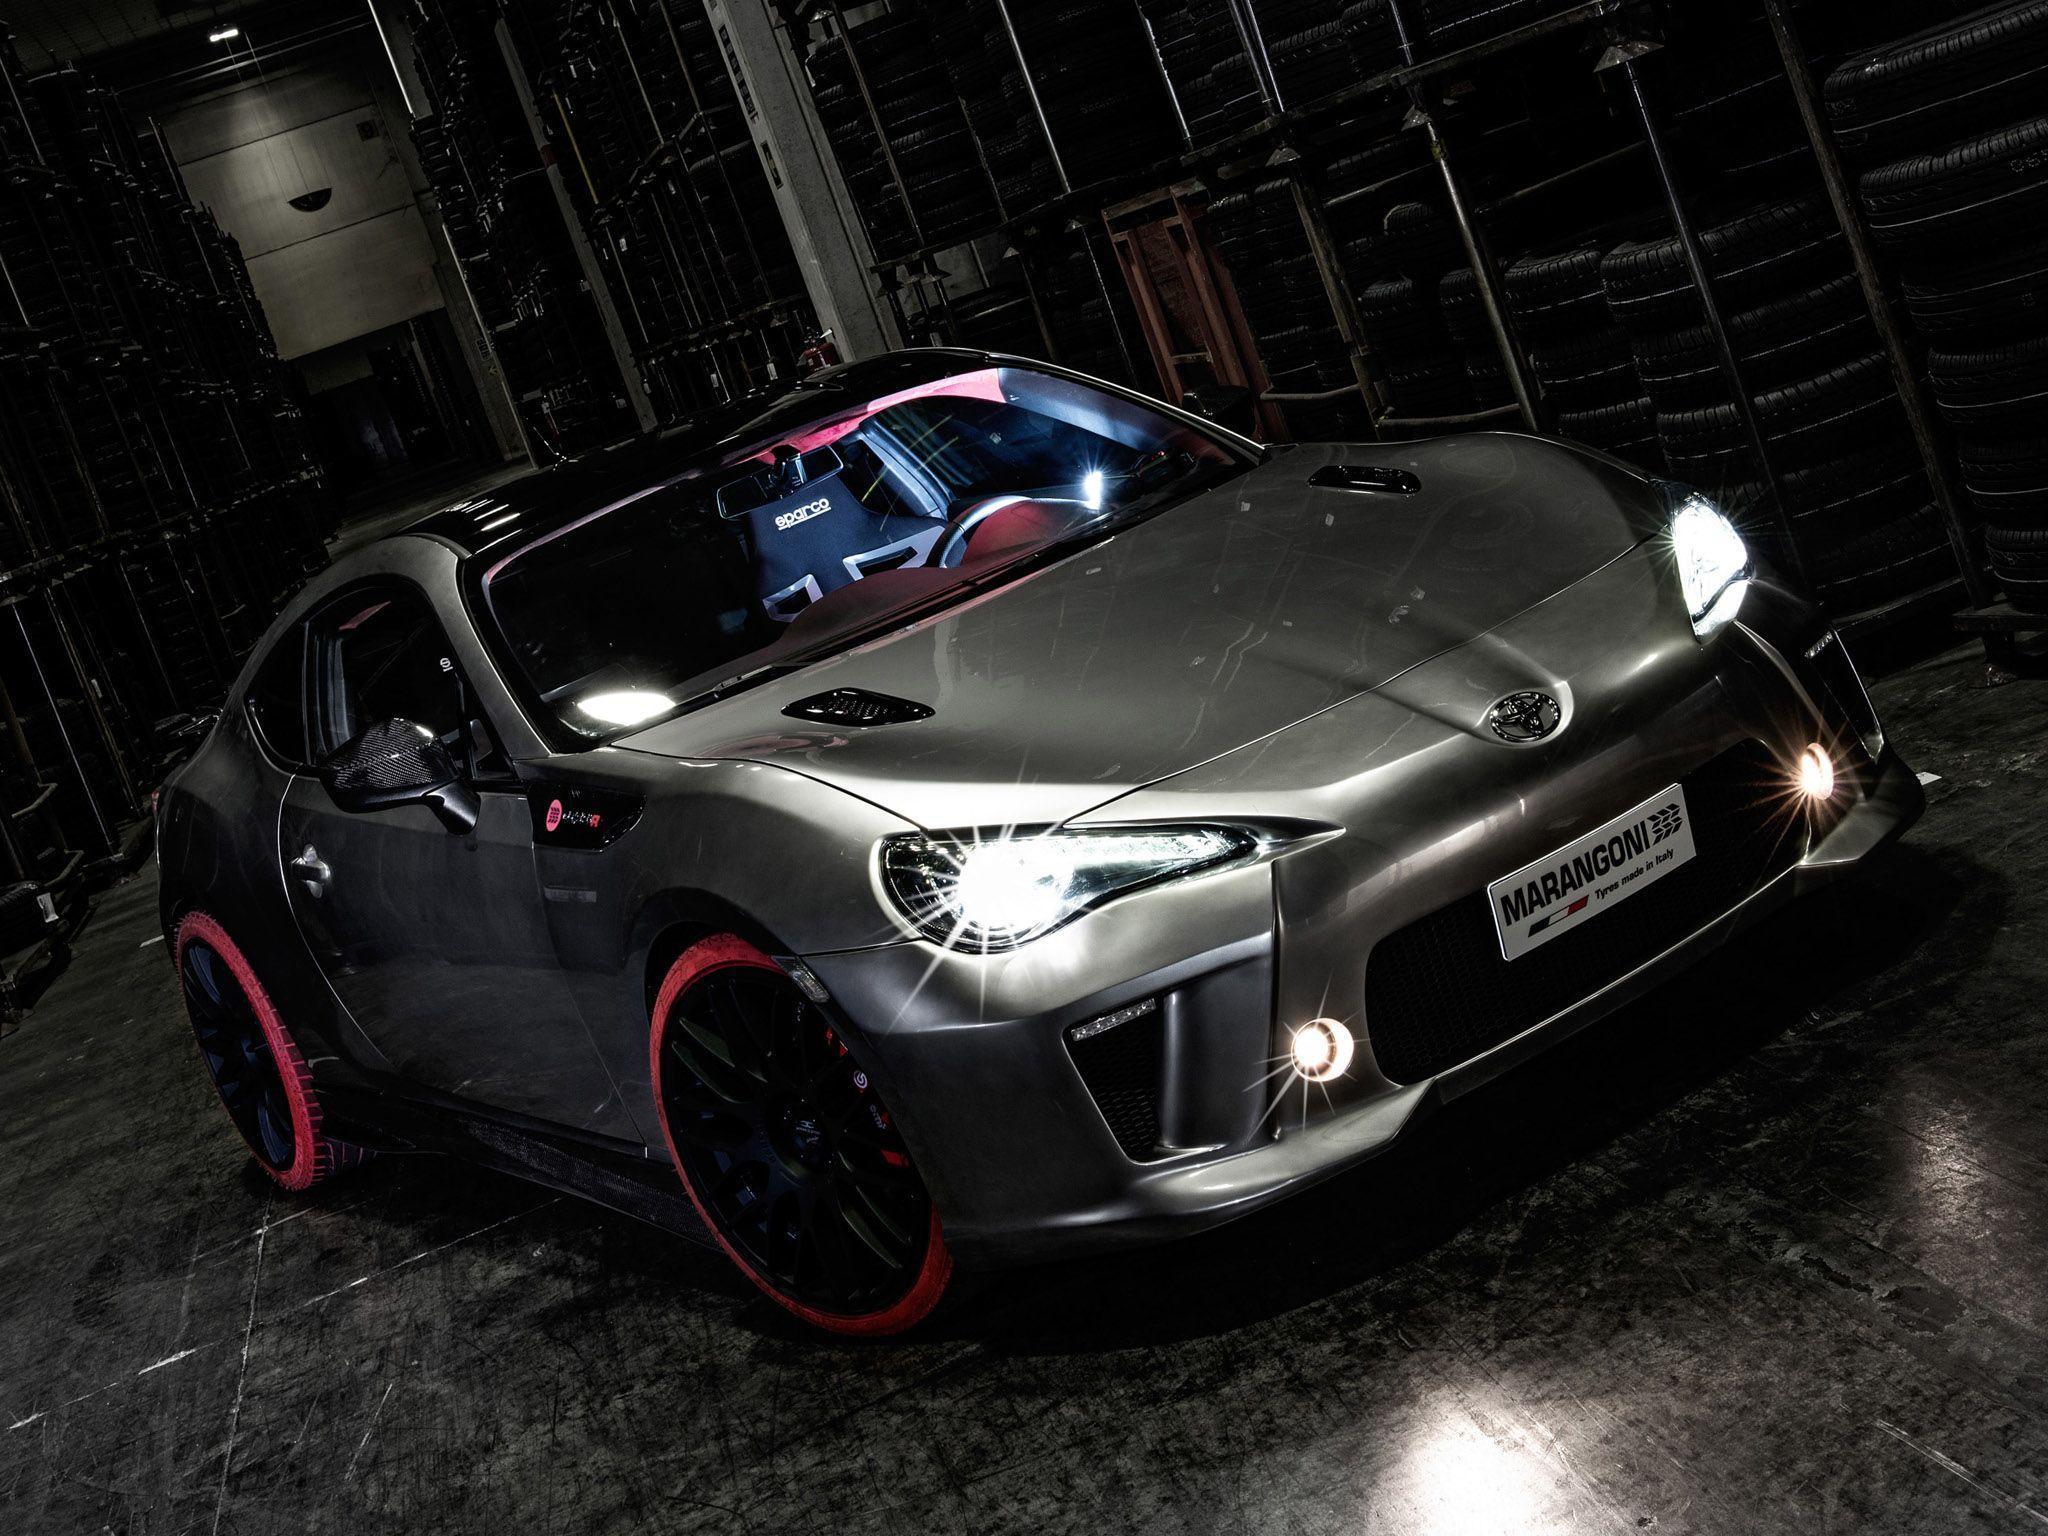 Toyota 86 Wallpaper, High Quality Toyota 86 Background